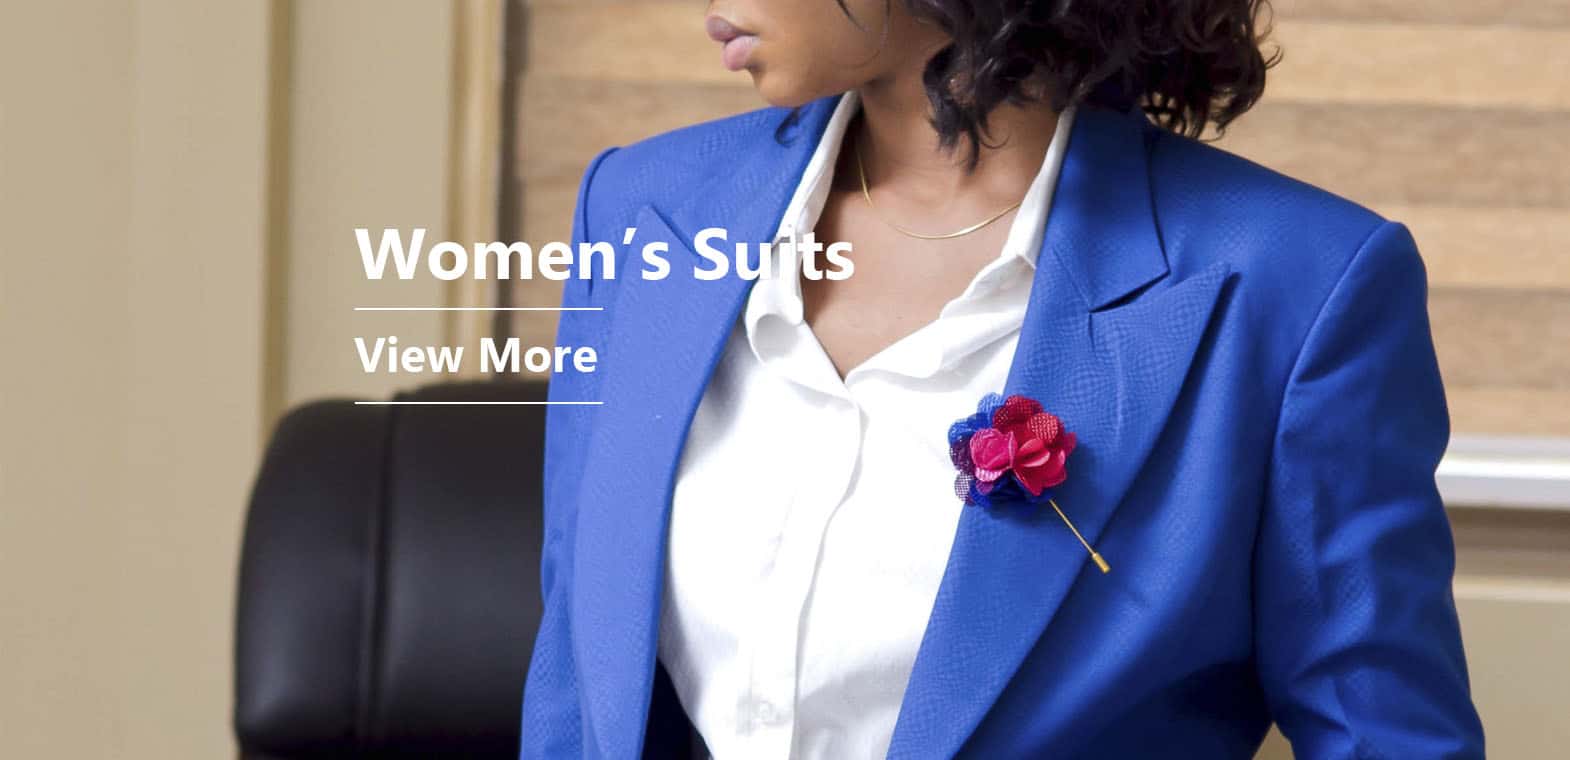 Bespoke women's suits by Ghanaian tailor Adjei Anang